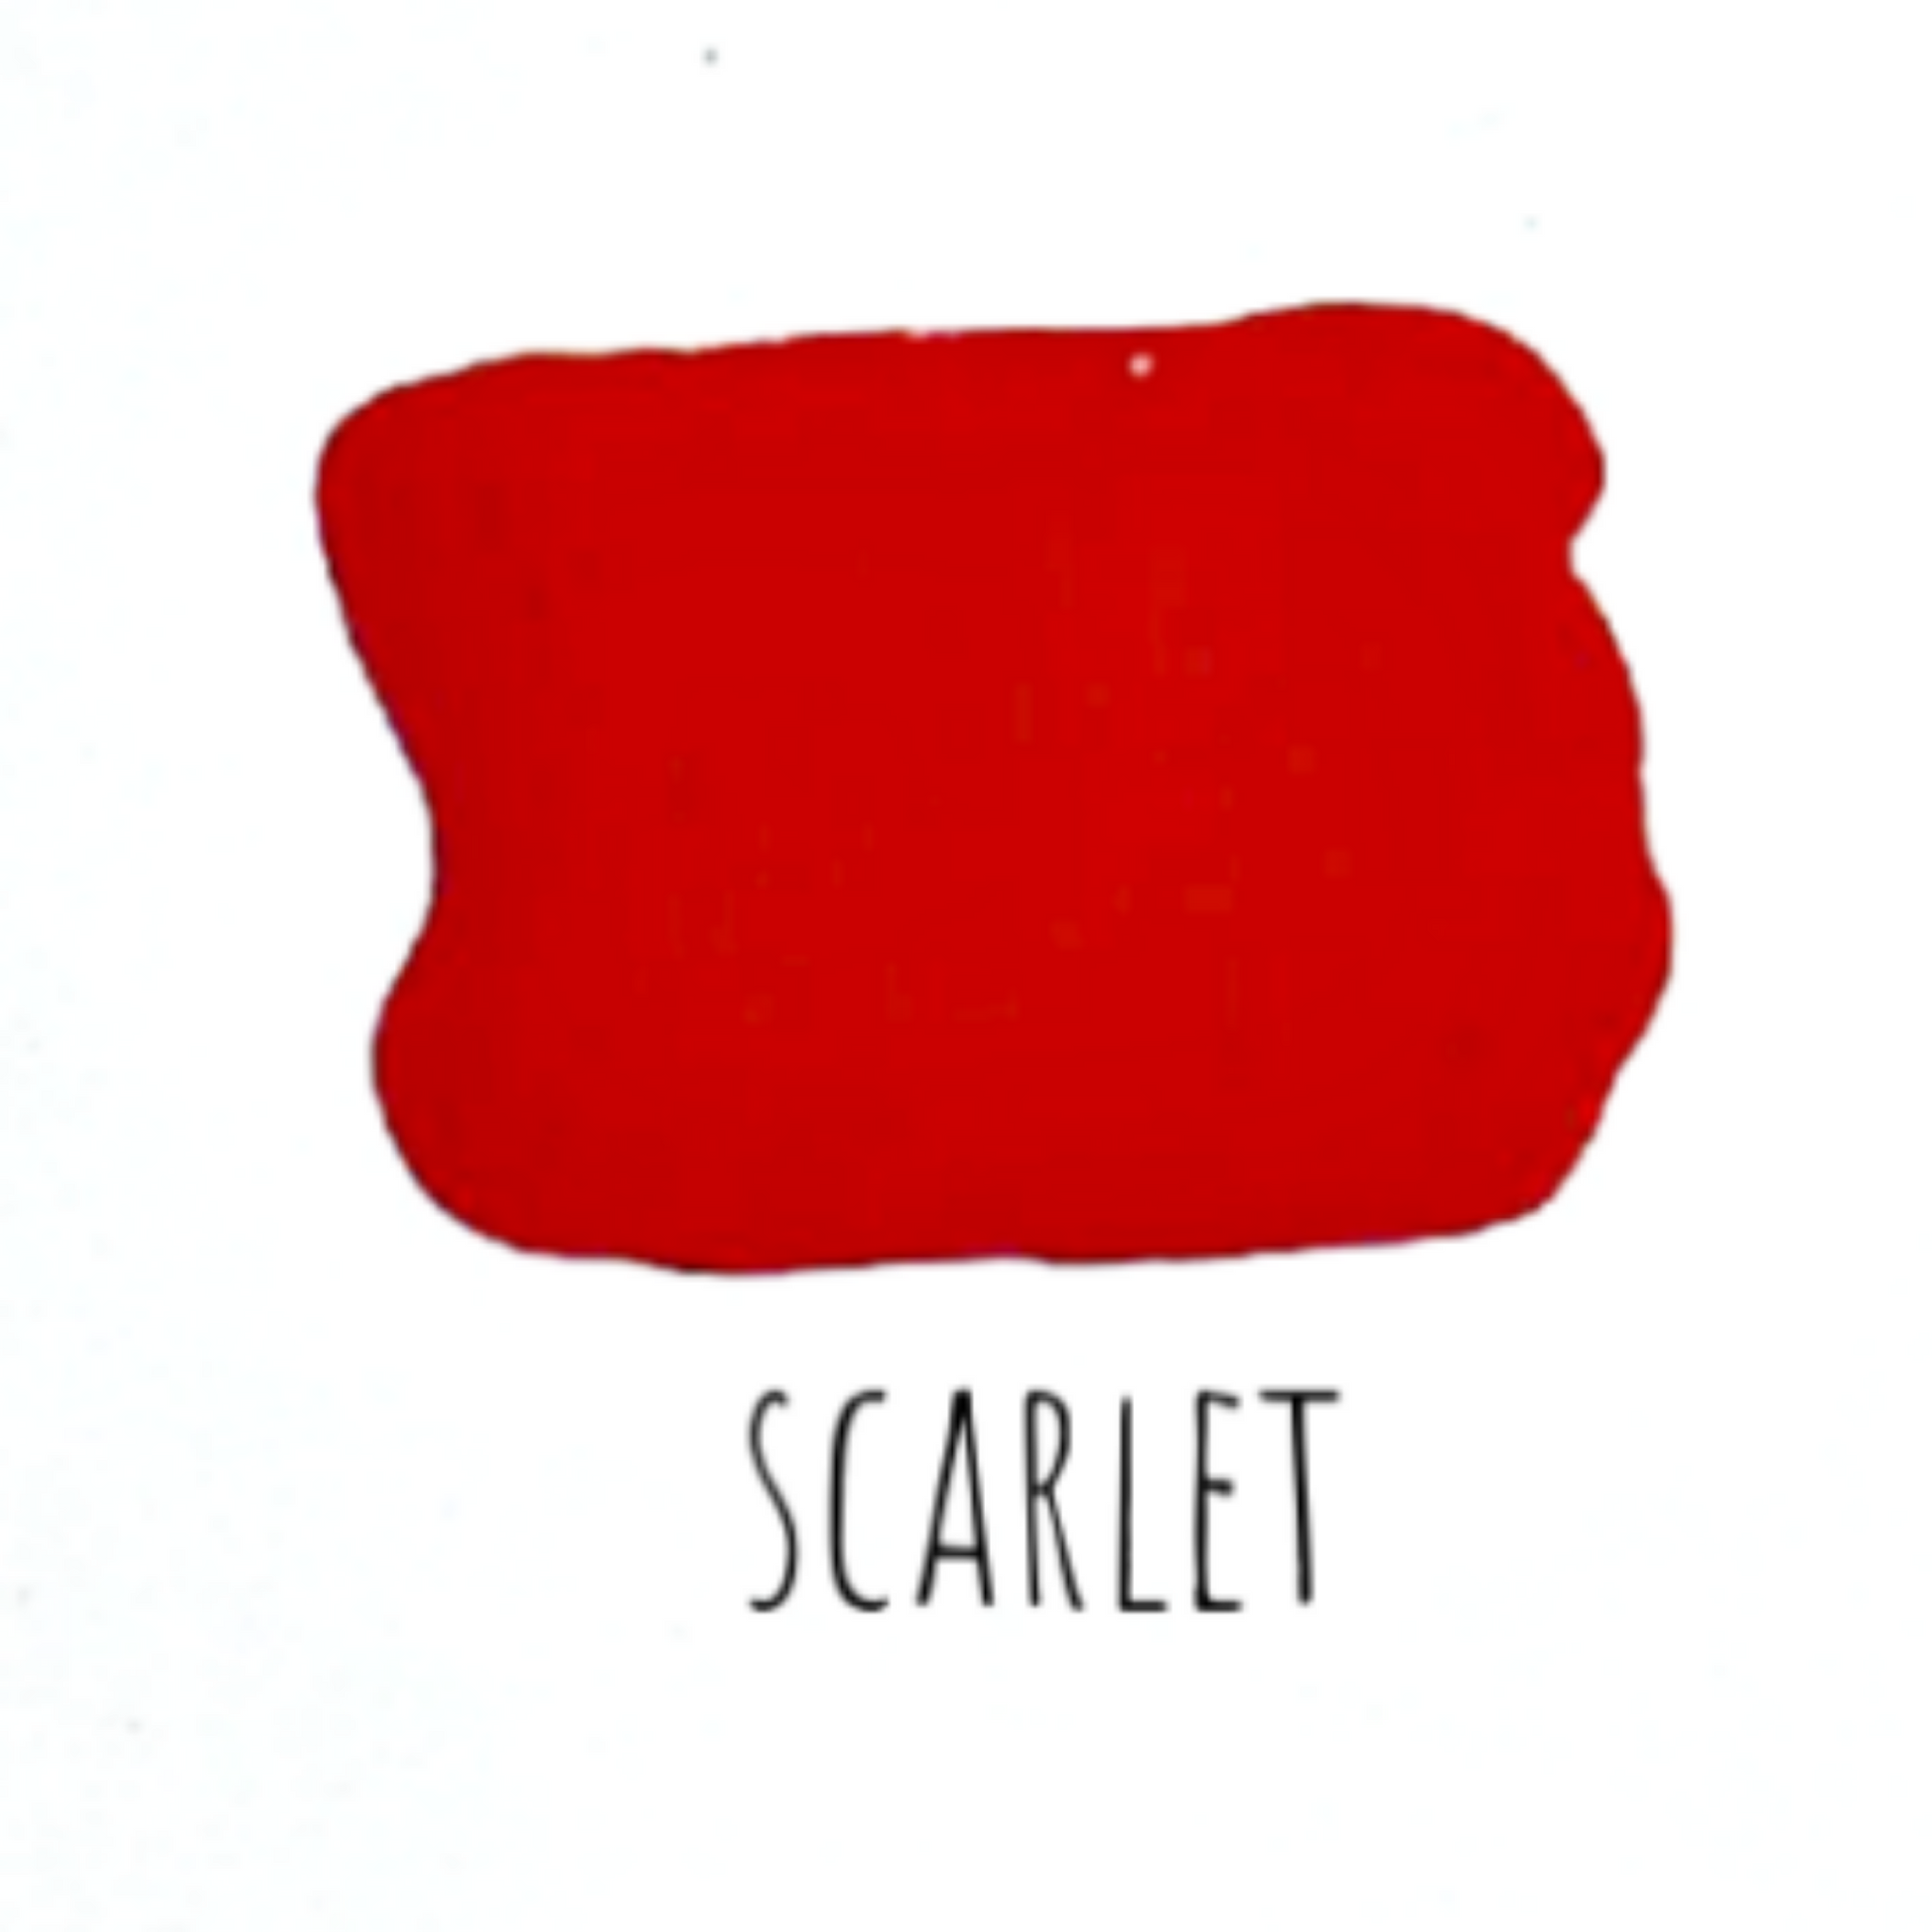 Sample paint swatch of Scarlet (bright red) by Sweet Pickins Milk Paint by Milton's Daughter